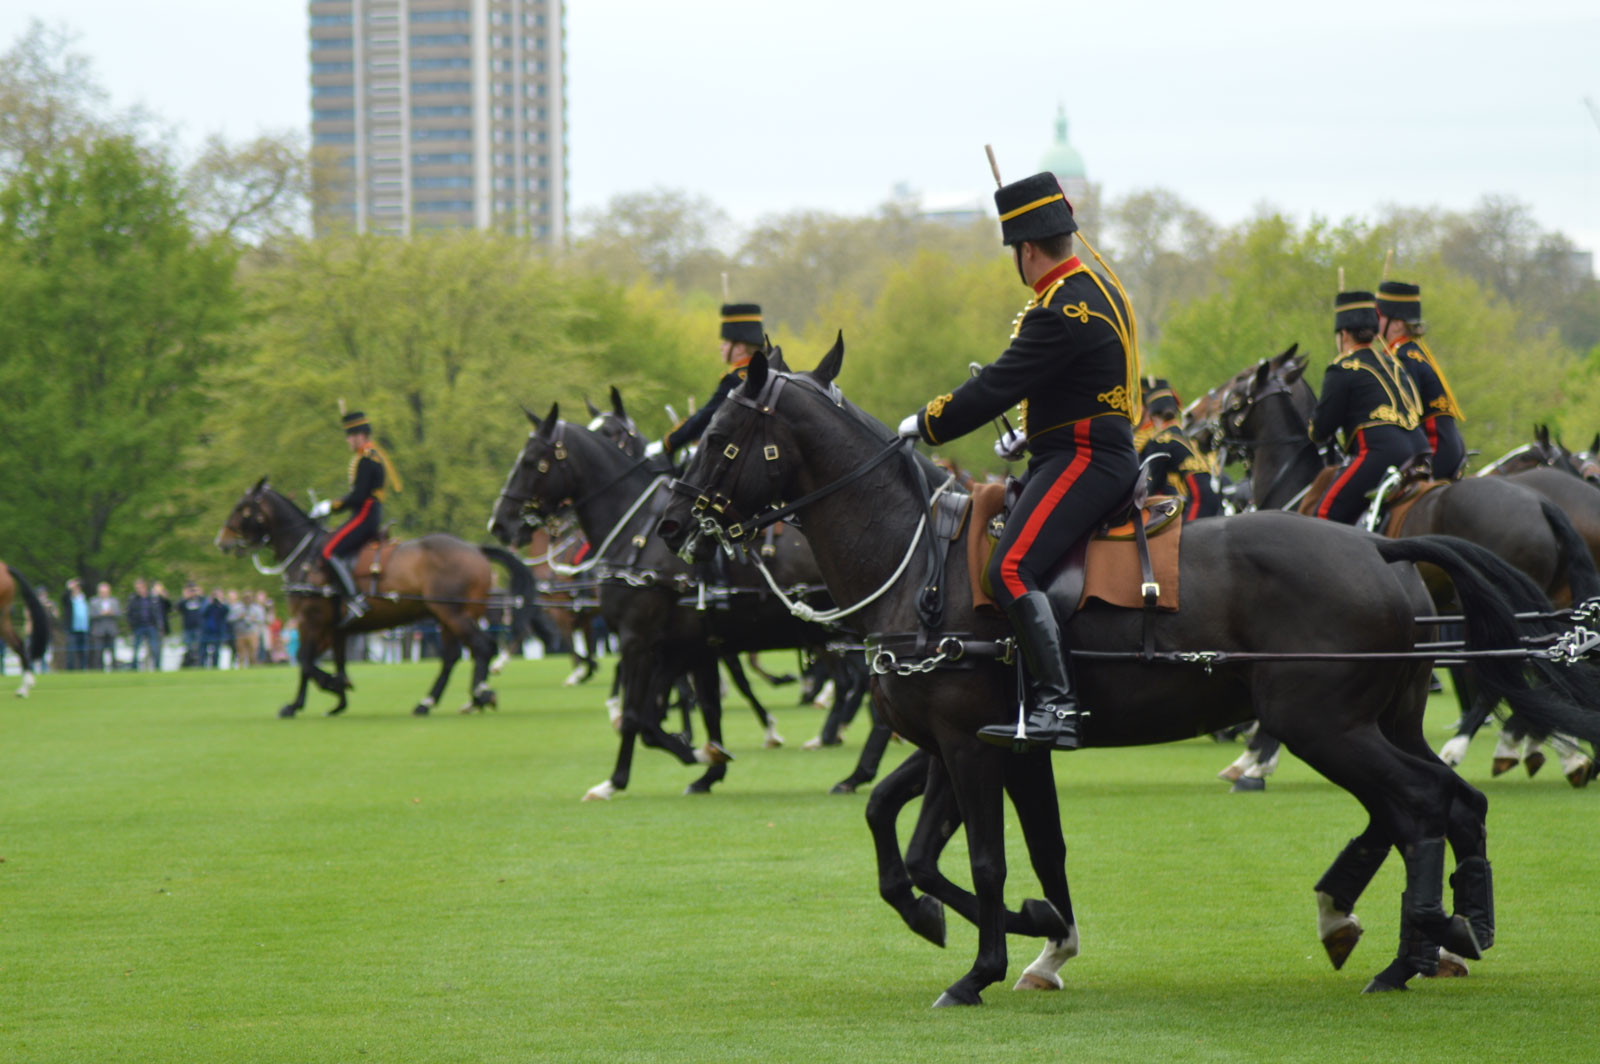 Kings Troop galloping to the firing point in Hyde Park